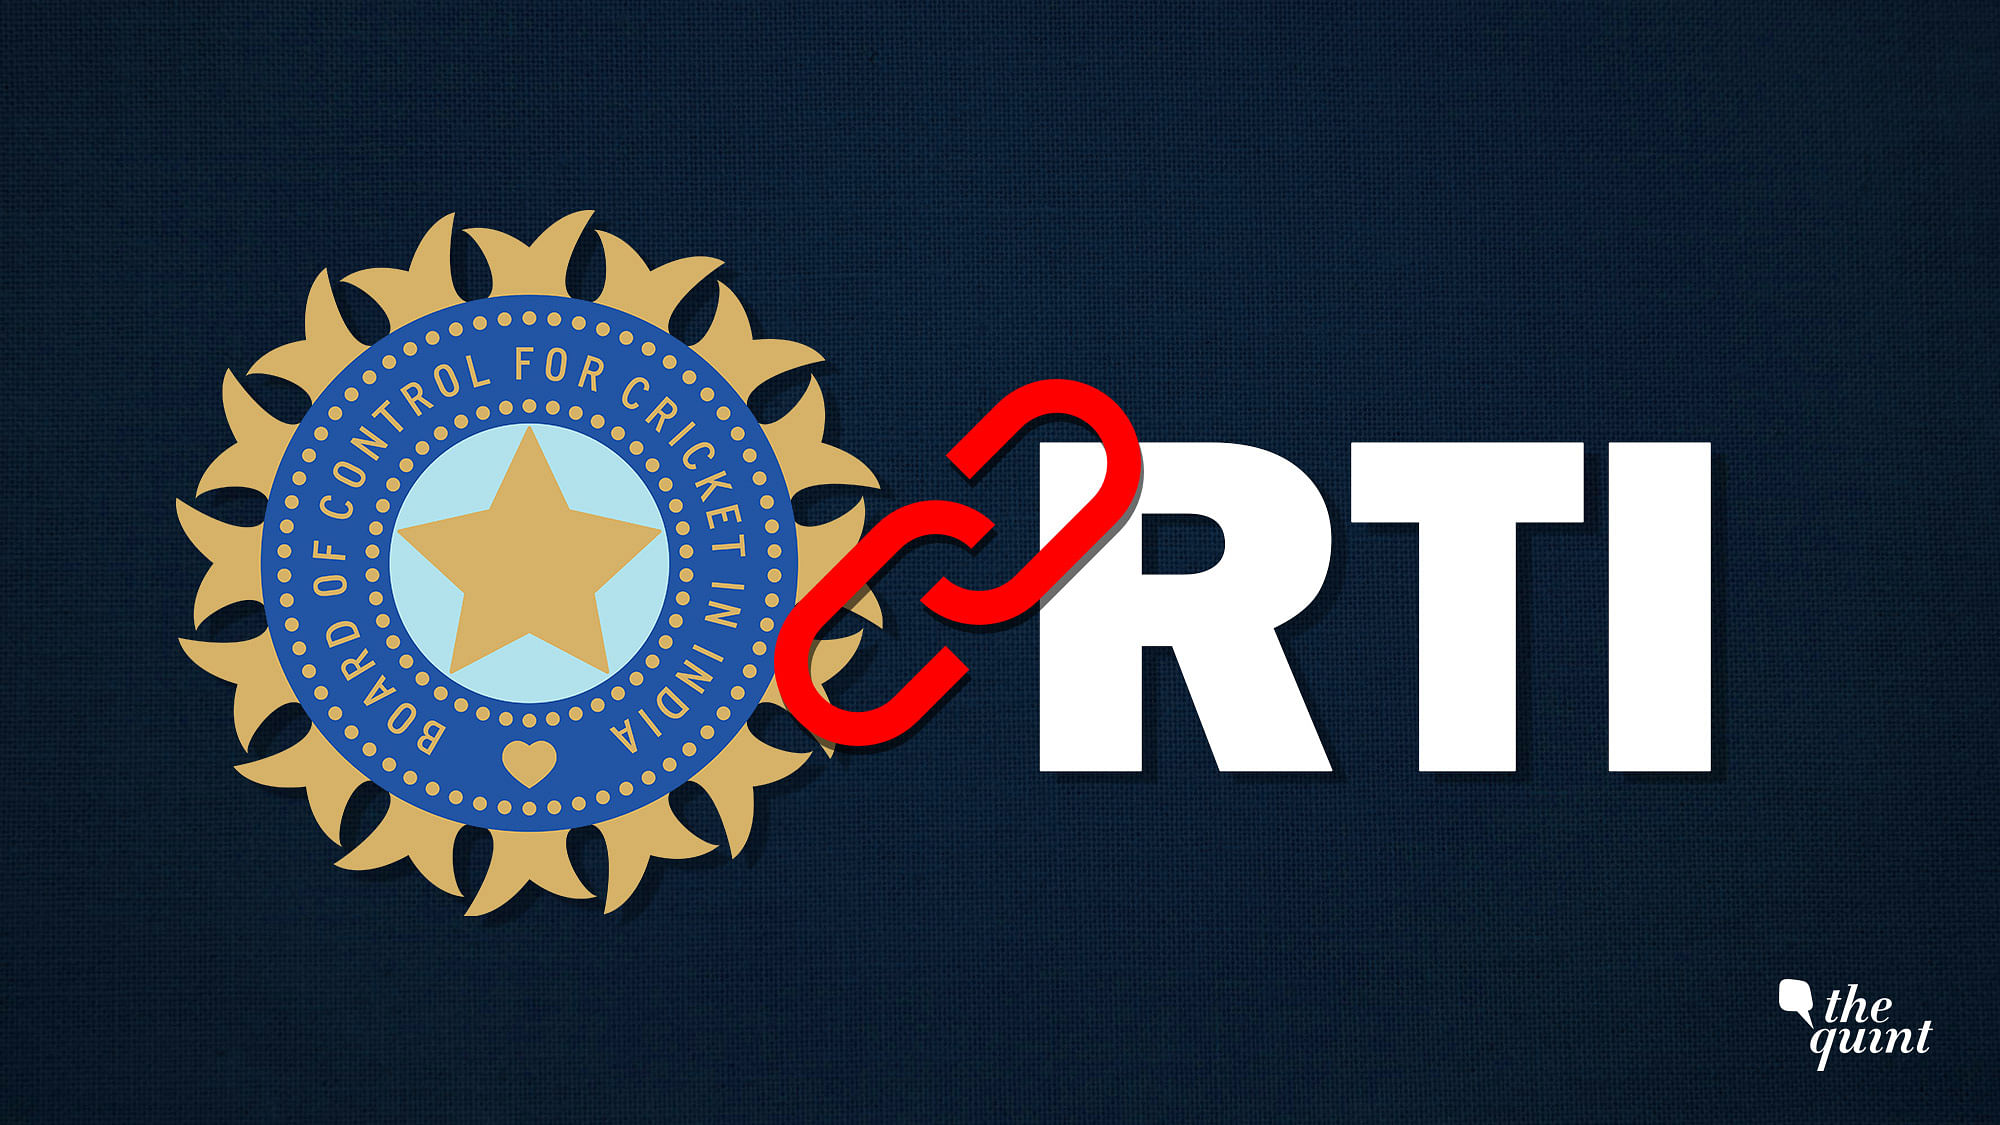 The Law Commission of India recommended that BCCI be brought within the purview of the RTI Act.